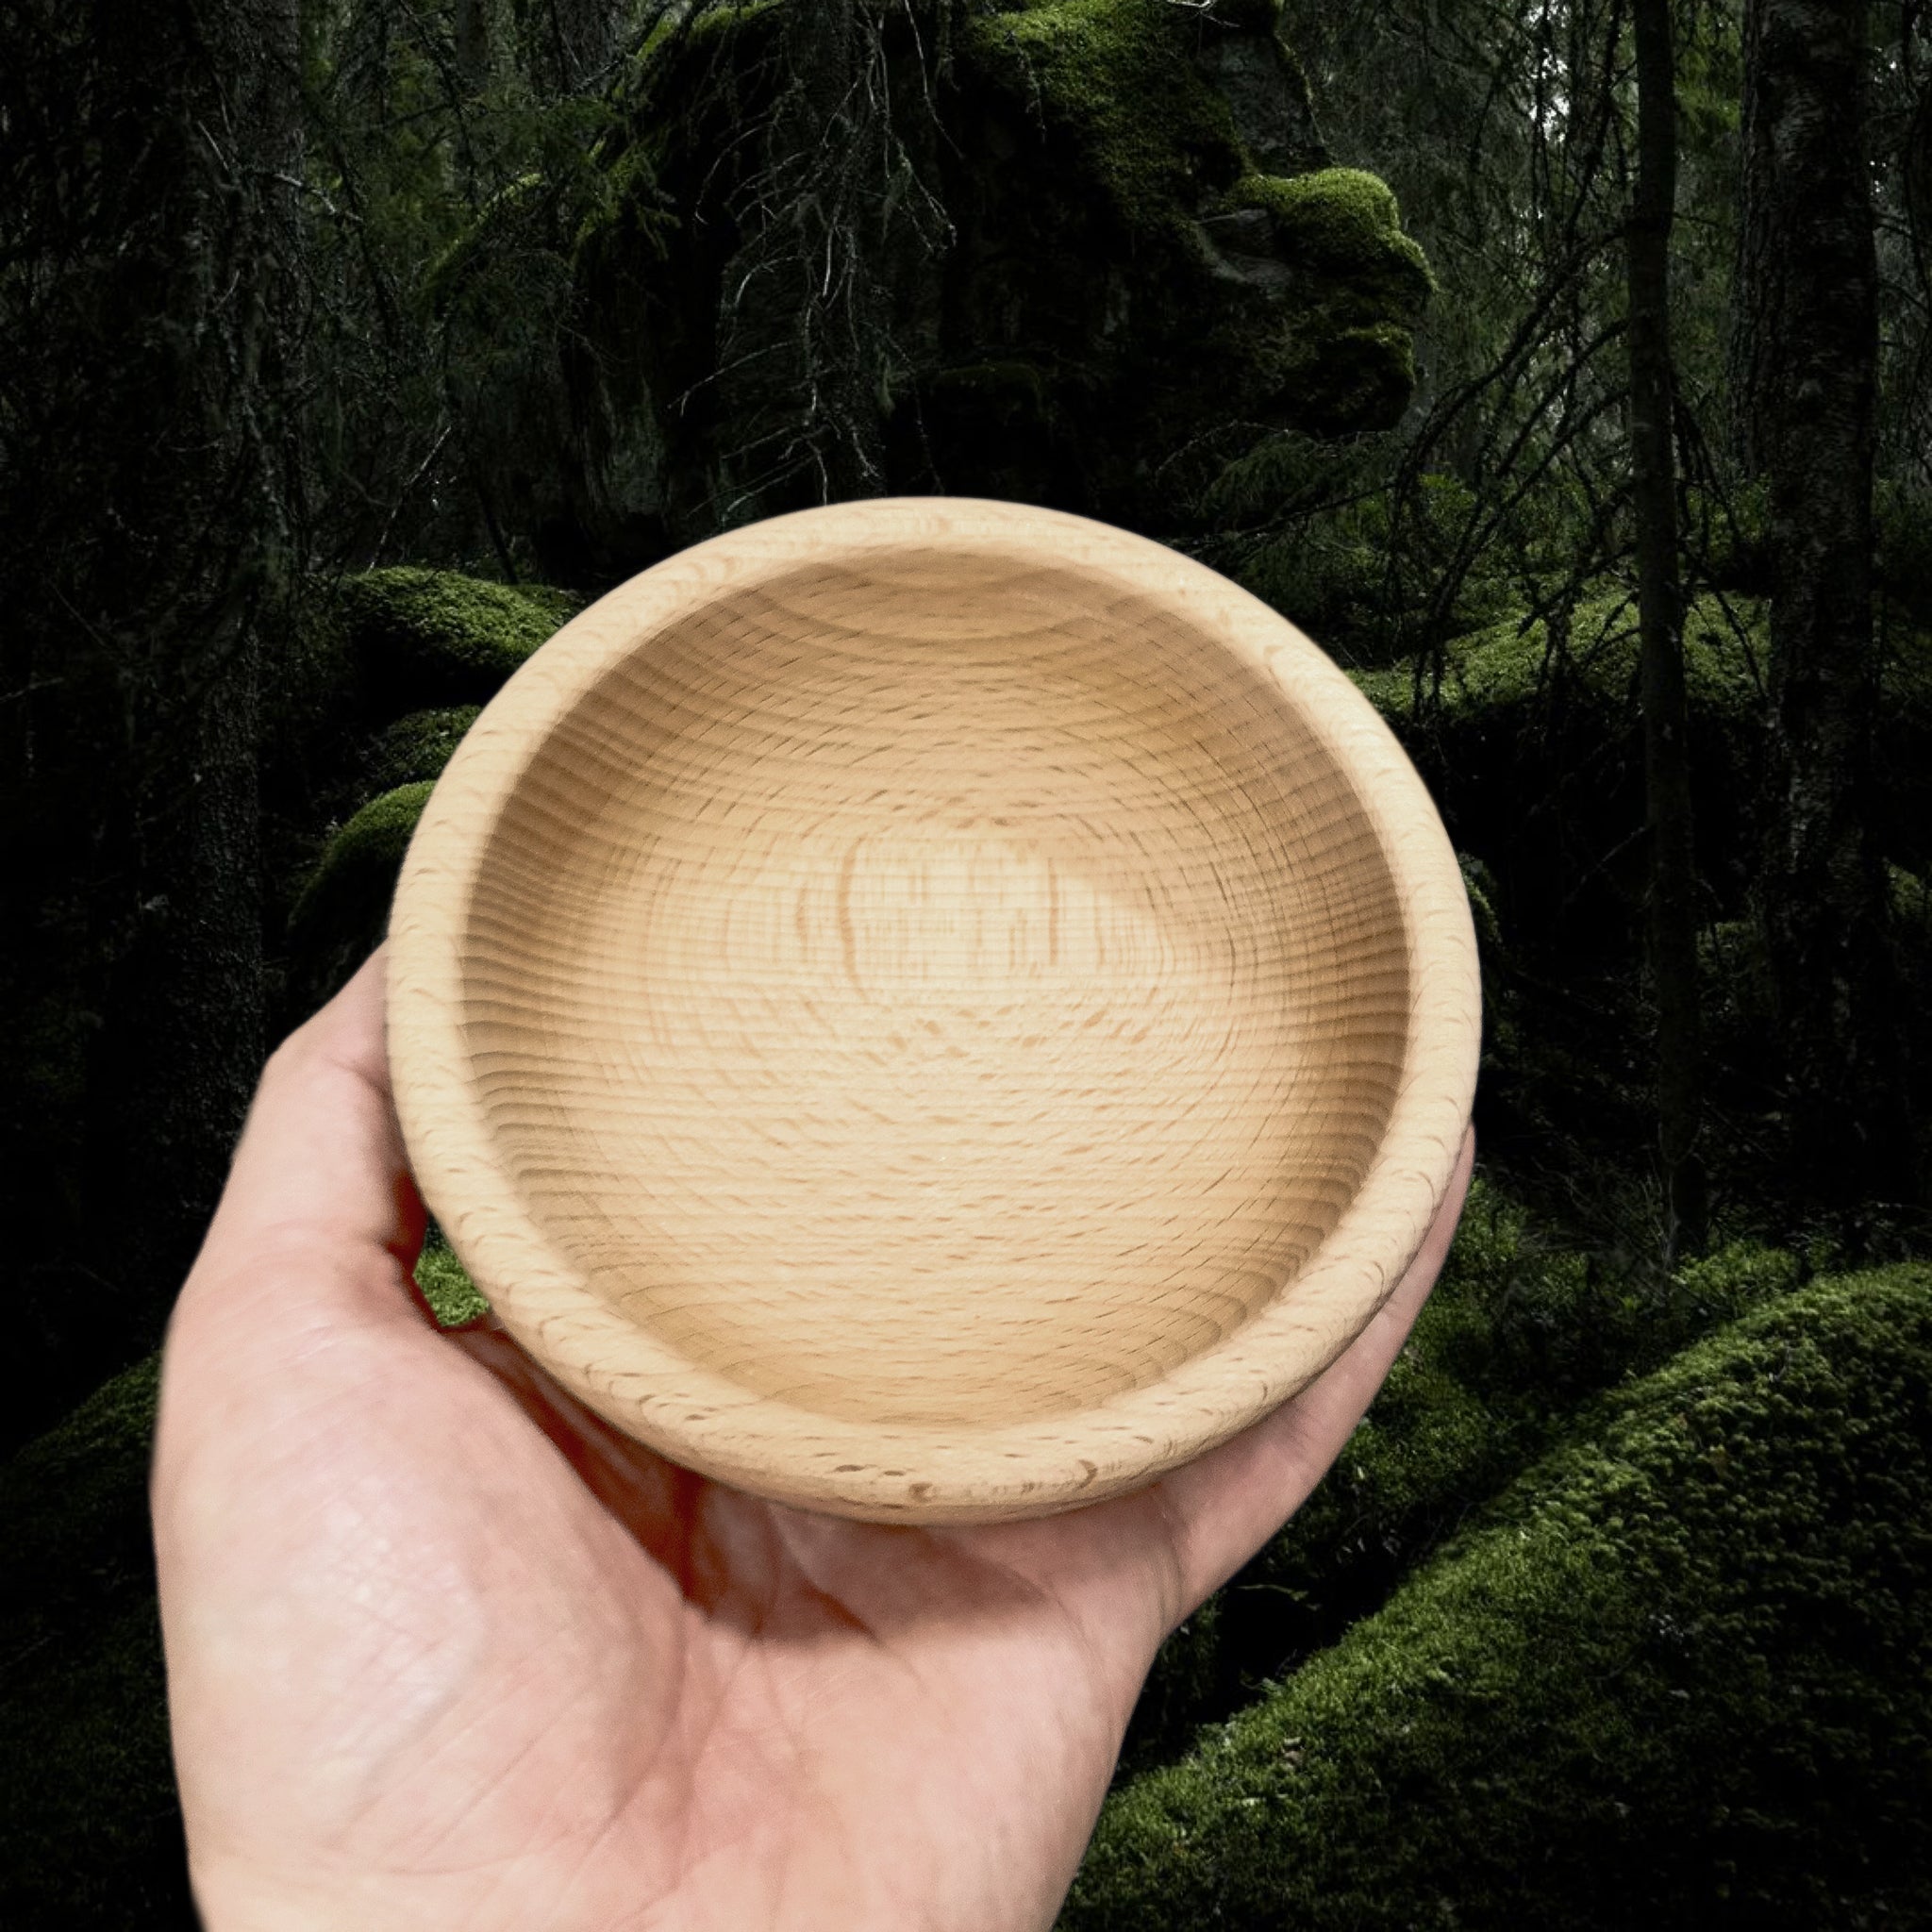 Small Hand Turned Medieval Wooden Bowl in Hand - Top View